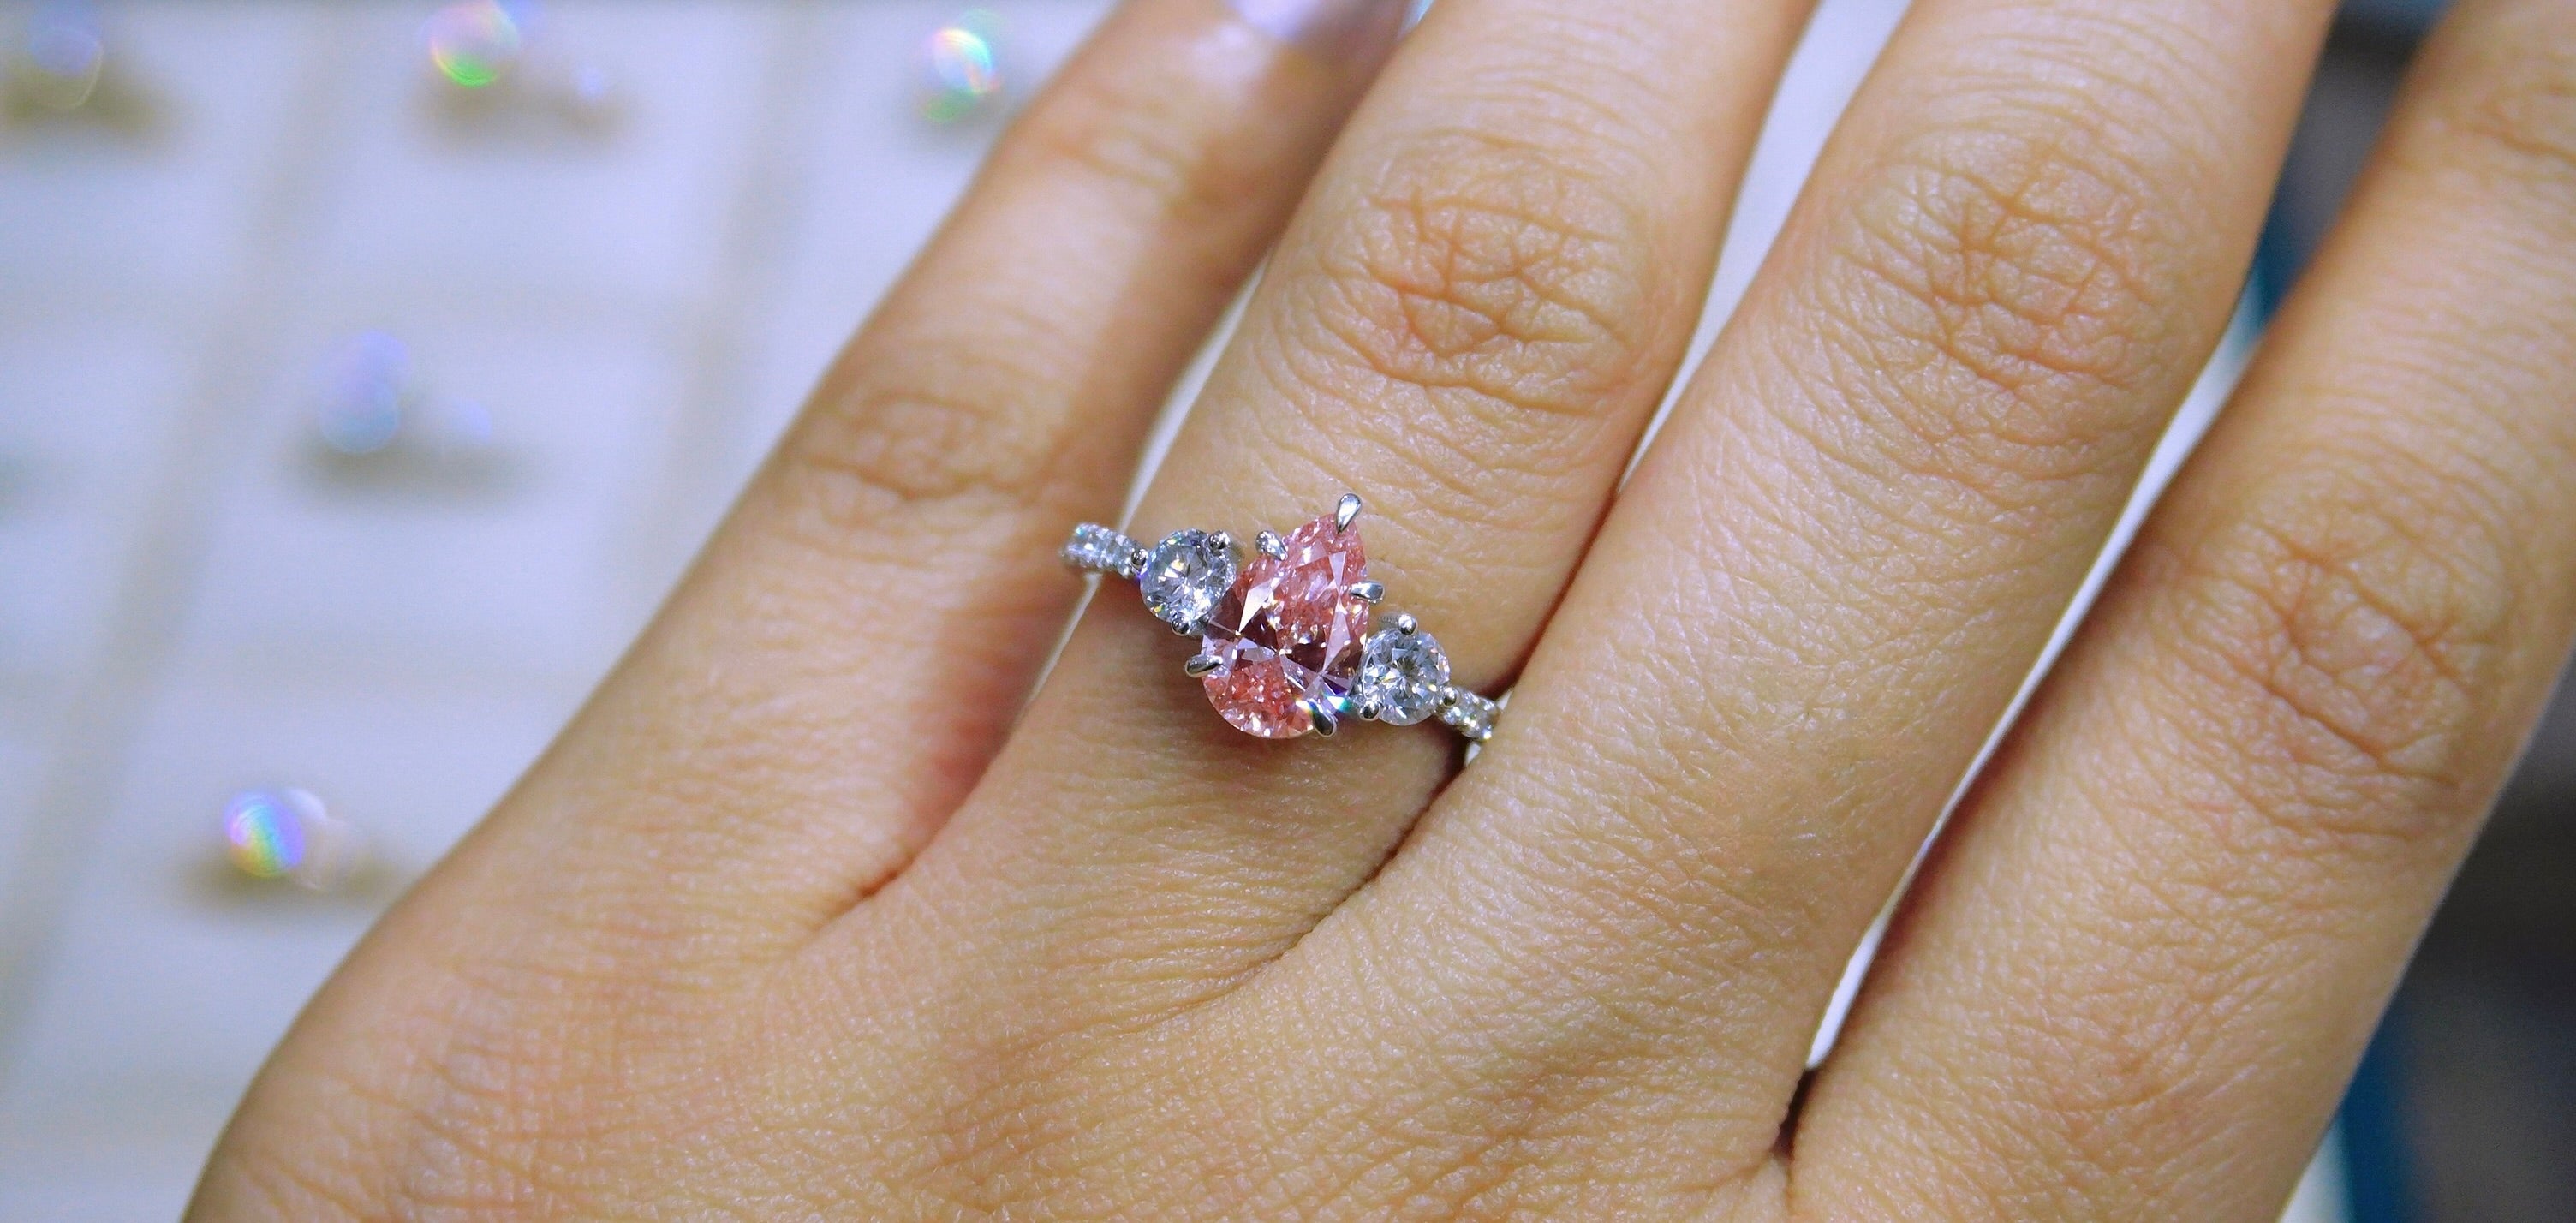 The Eternal Pink: The Most Significant Pink Diamond To Ever Appear